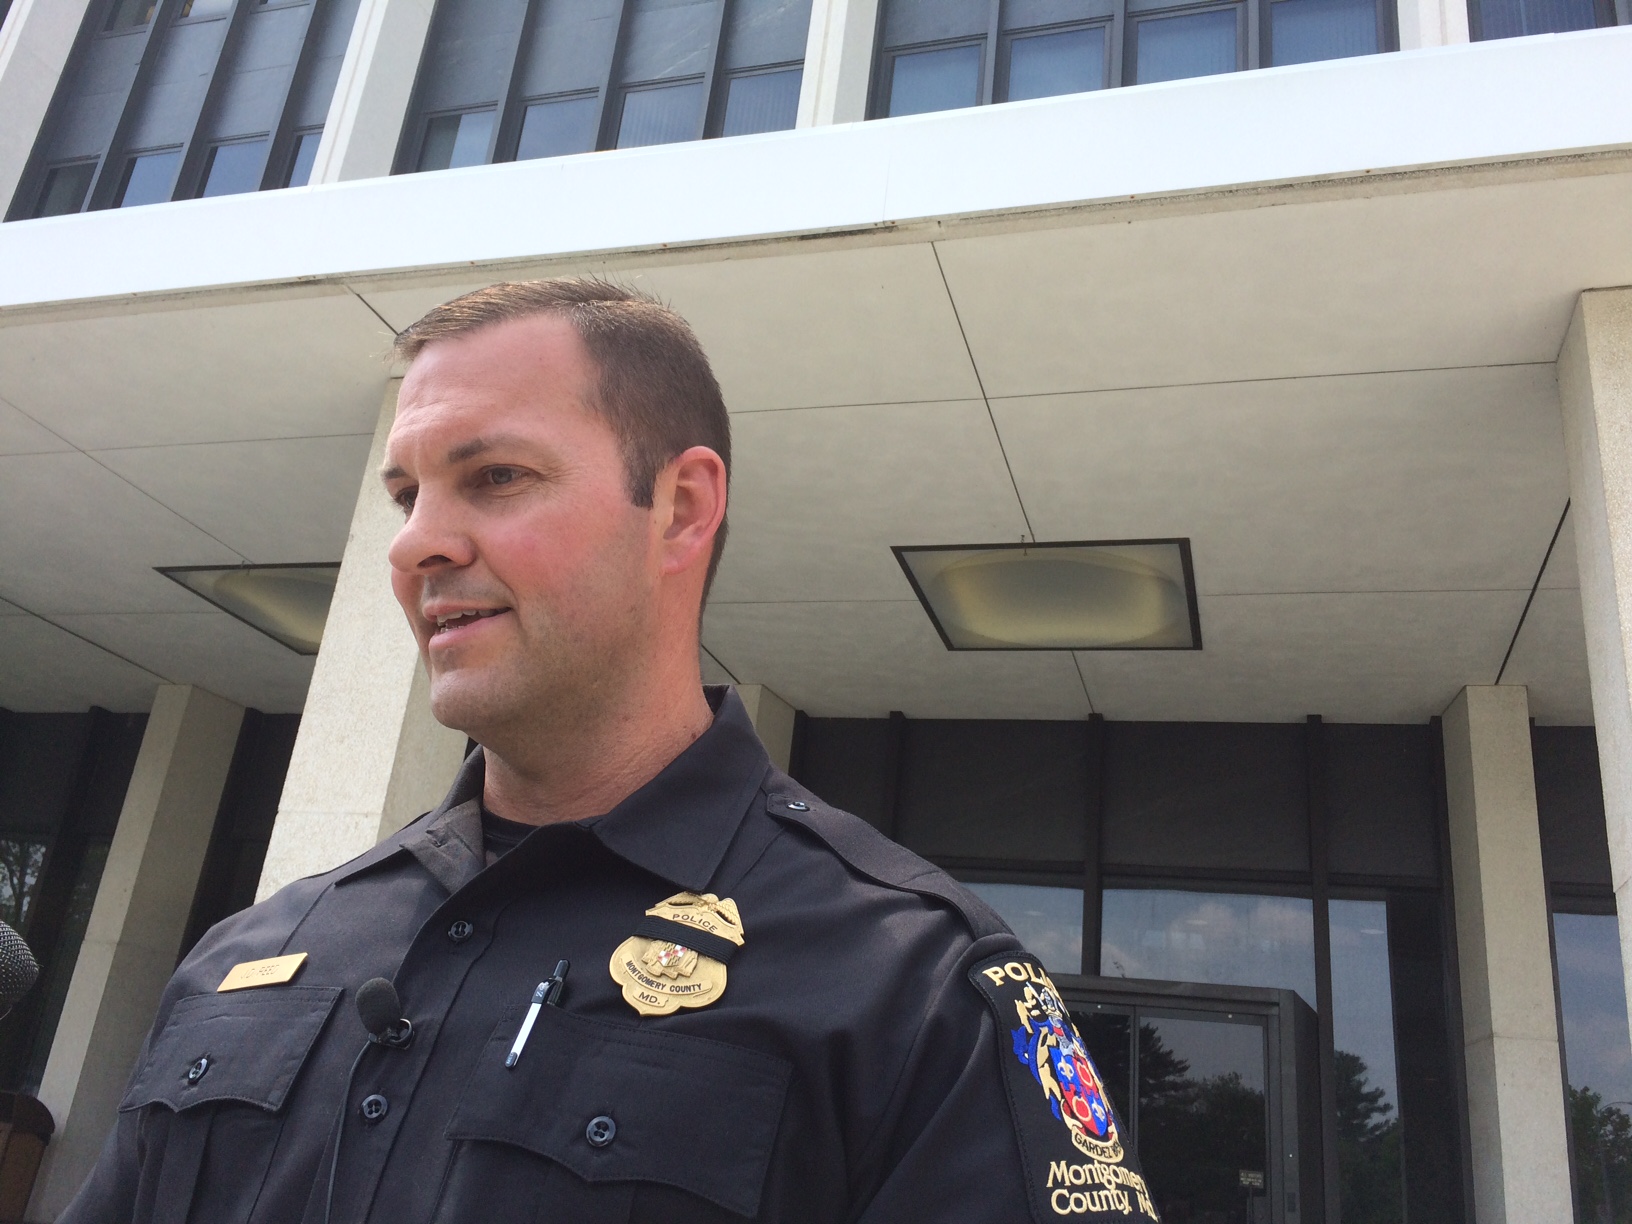 Montgomery County police officer saves infant’s life